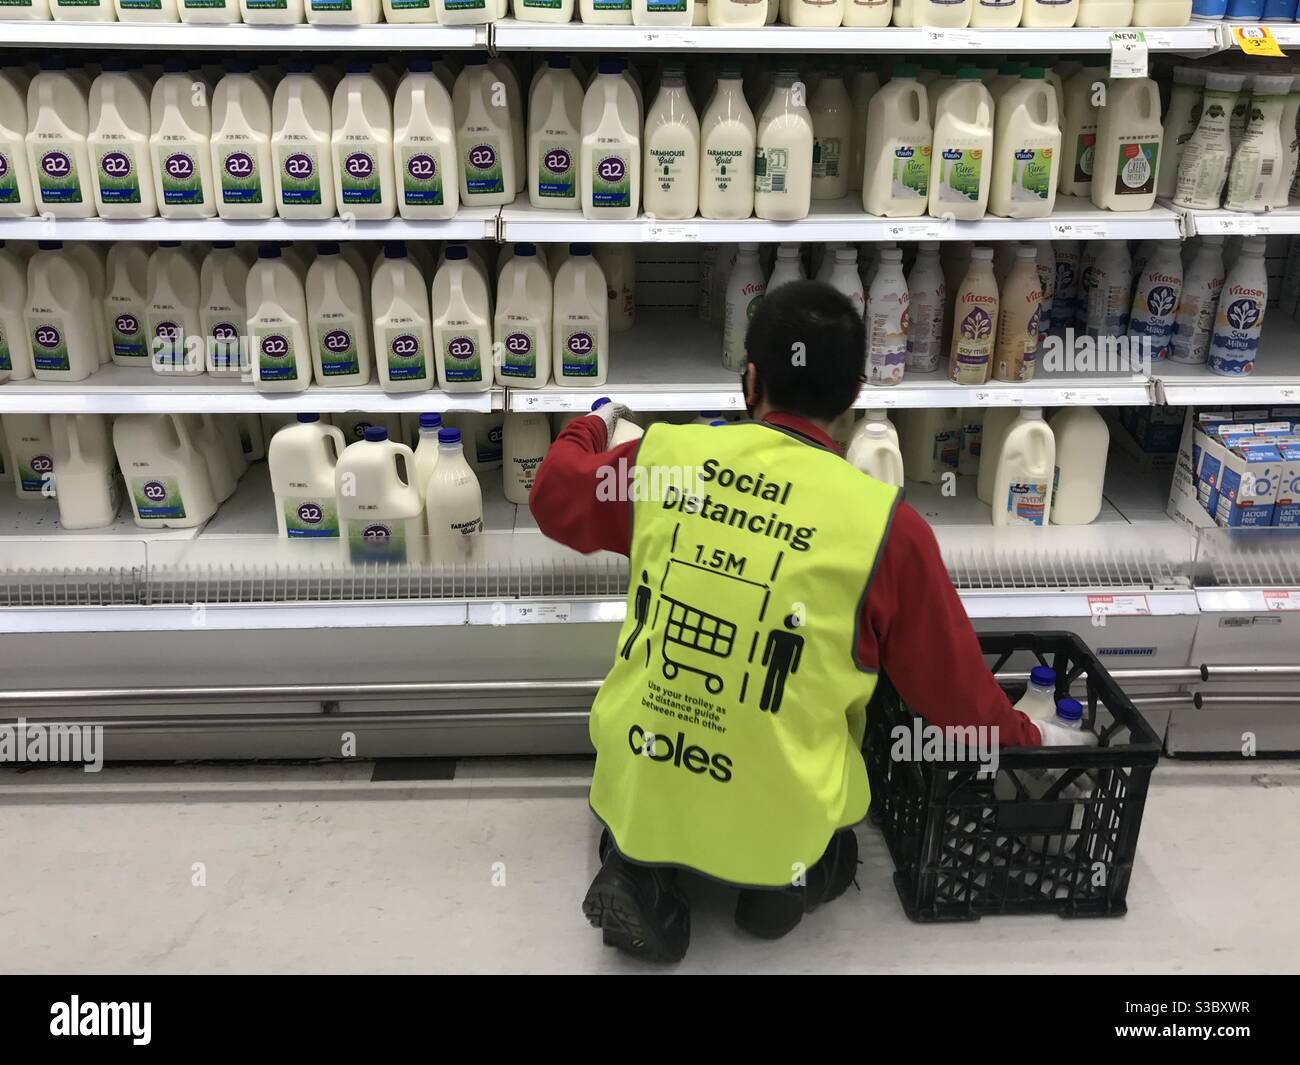 A worker in Coles supermarket restocks milk during the COVID-19 (coronavirus) pandemic wearing a social distancing vest. Stock Photo